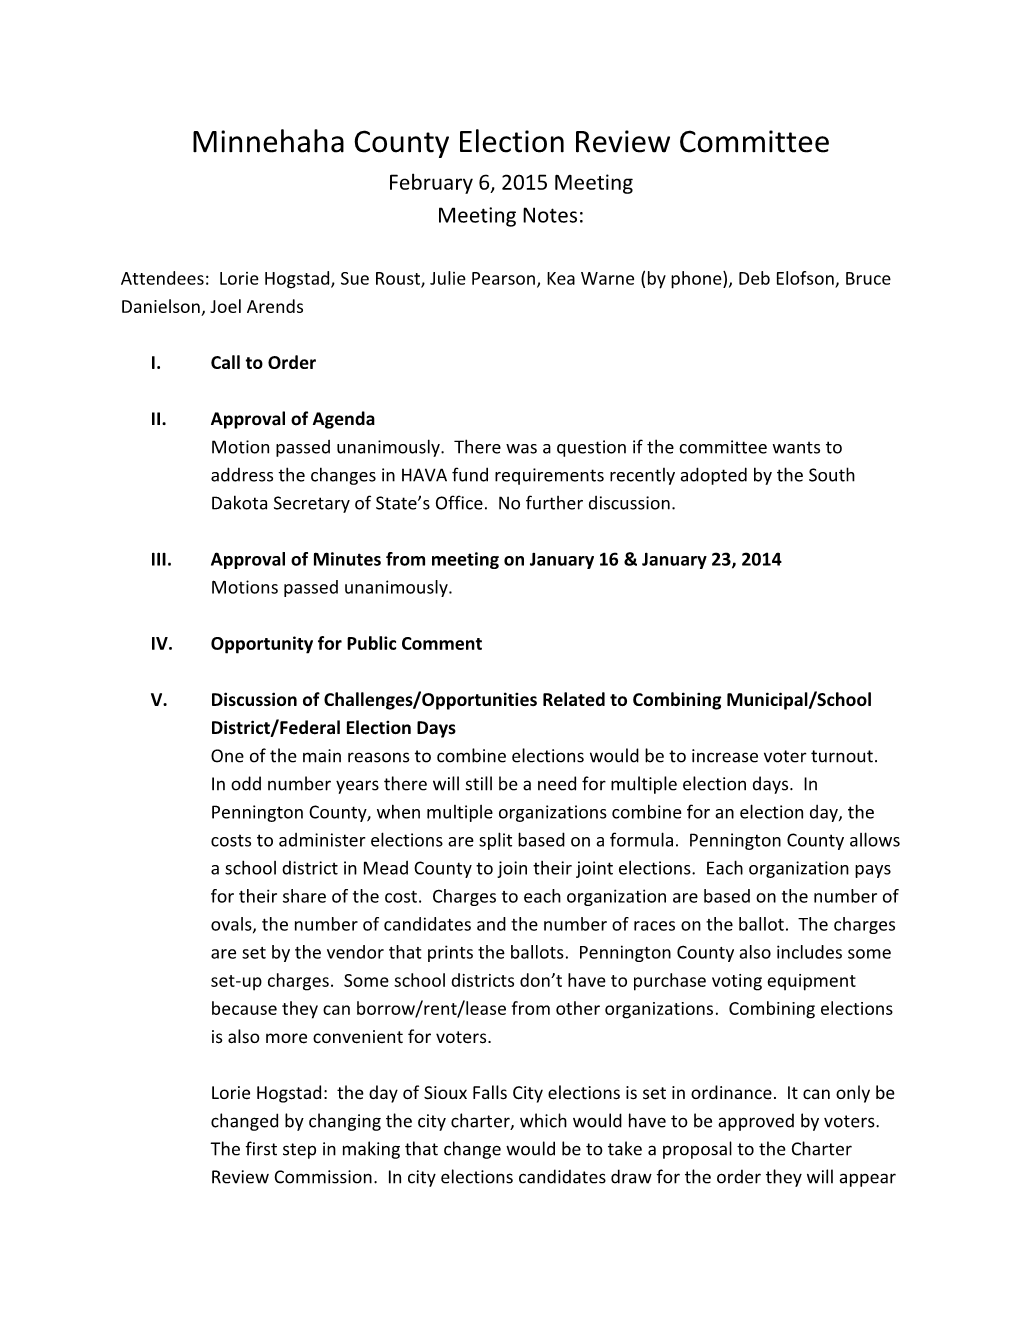 Minnehaha County Election Review Committee February 6, 2015 Meeting Meeting Notes